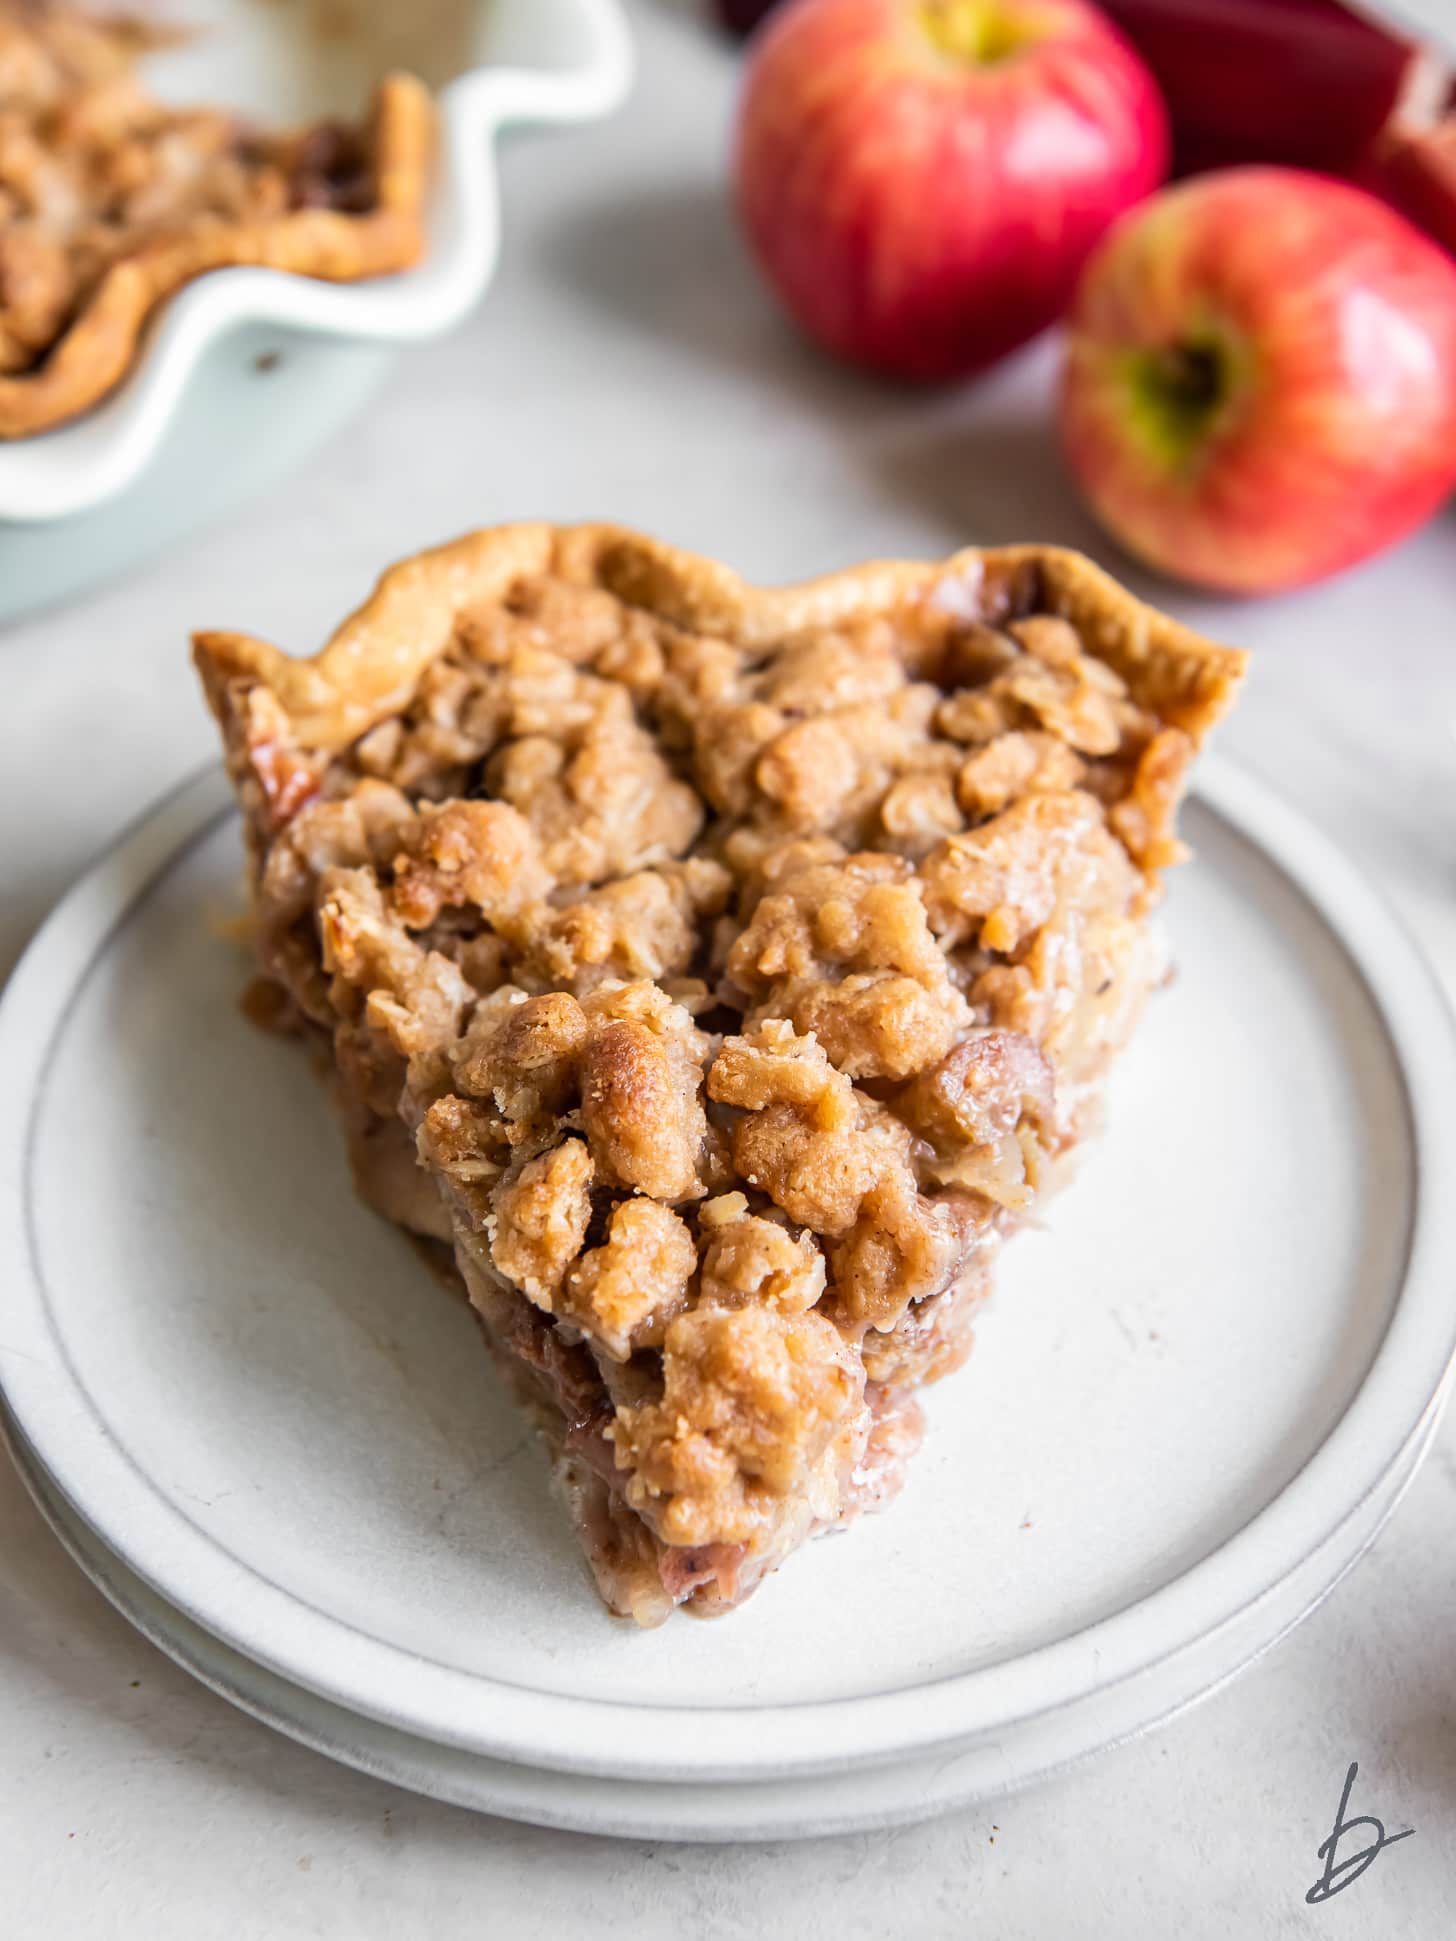 slice of apple rhubarb pie with crumb topping on a plate.